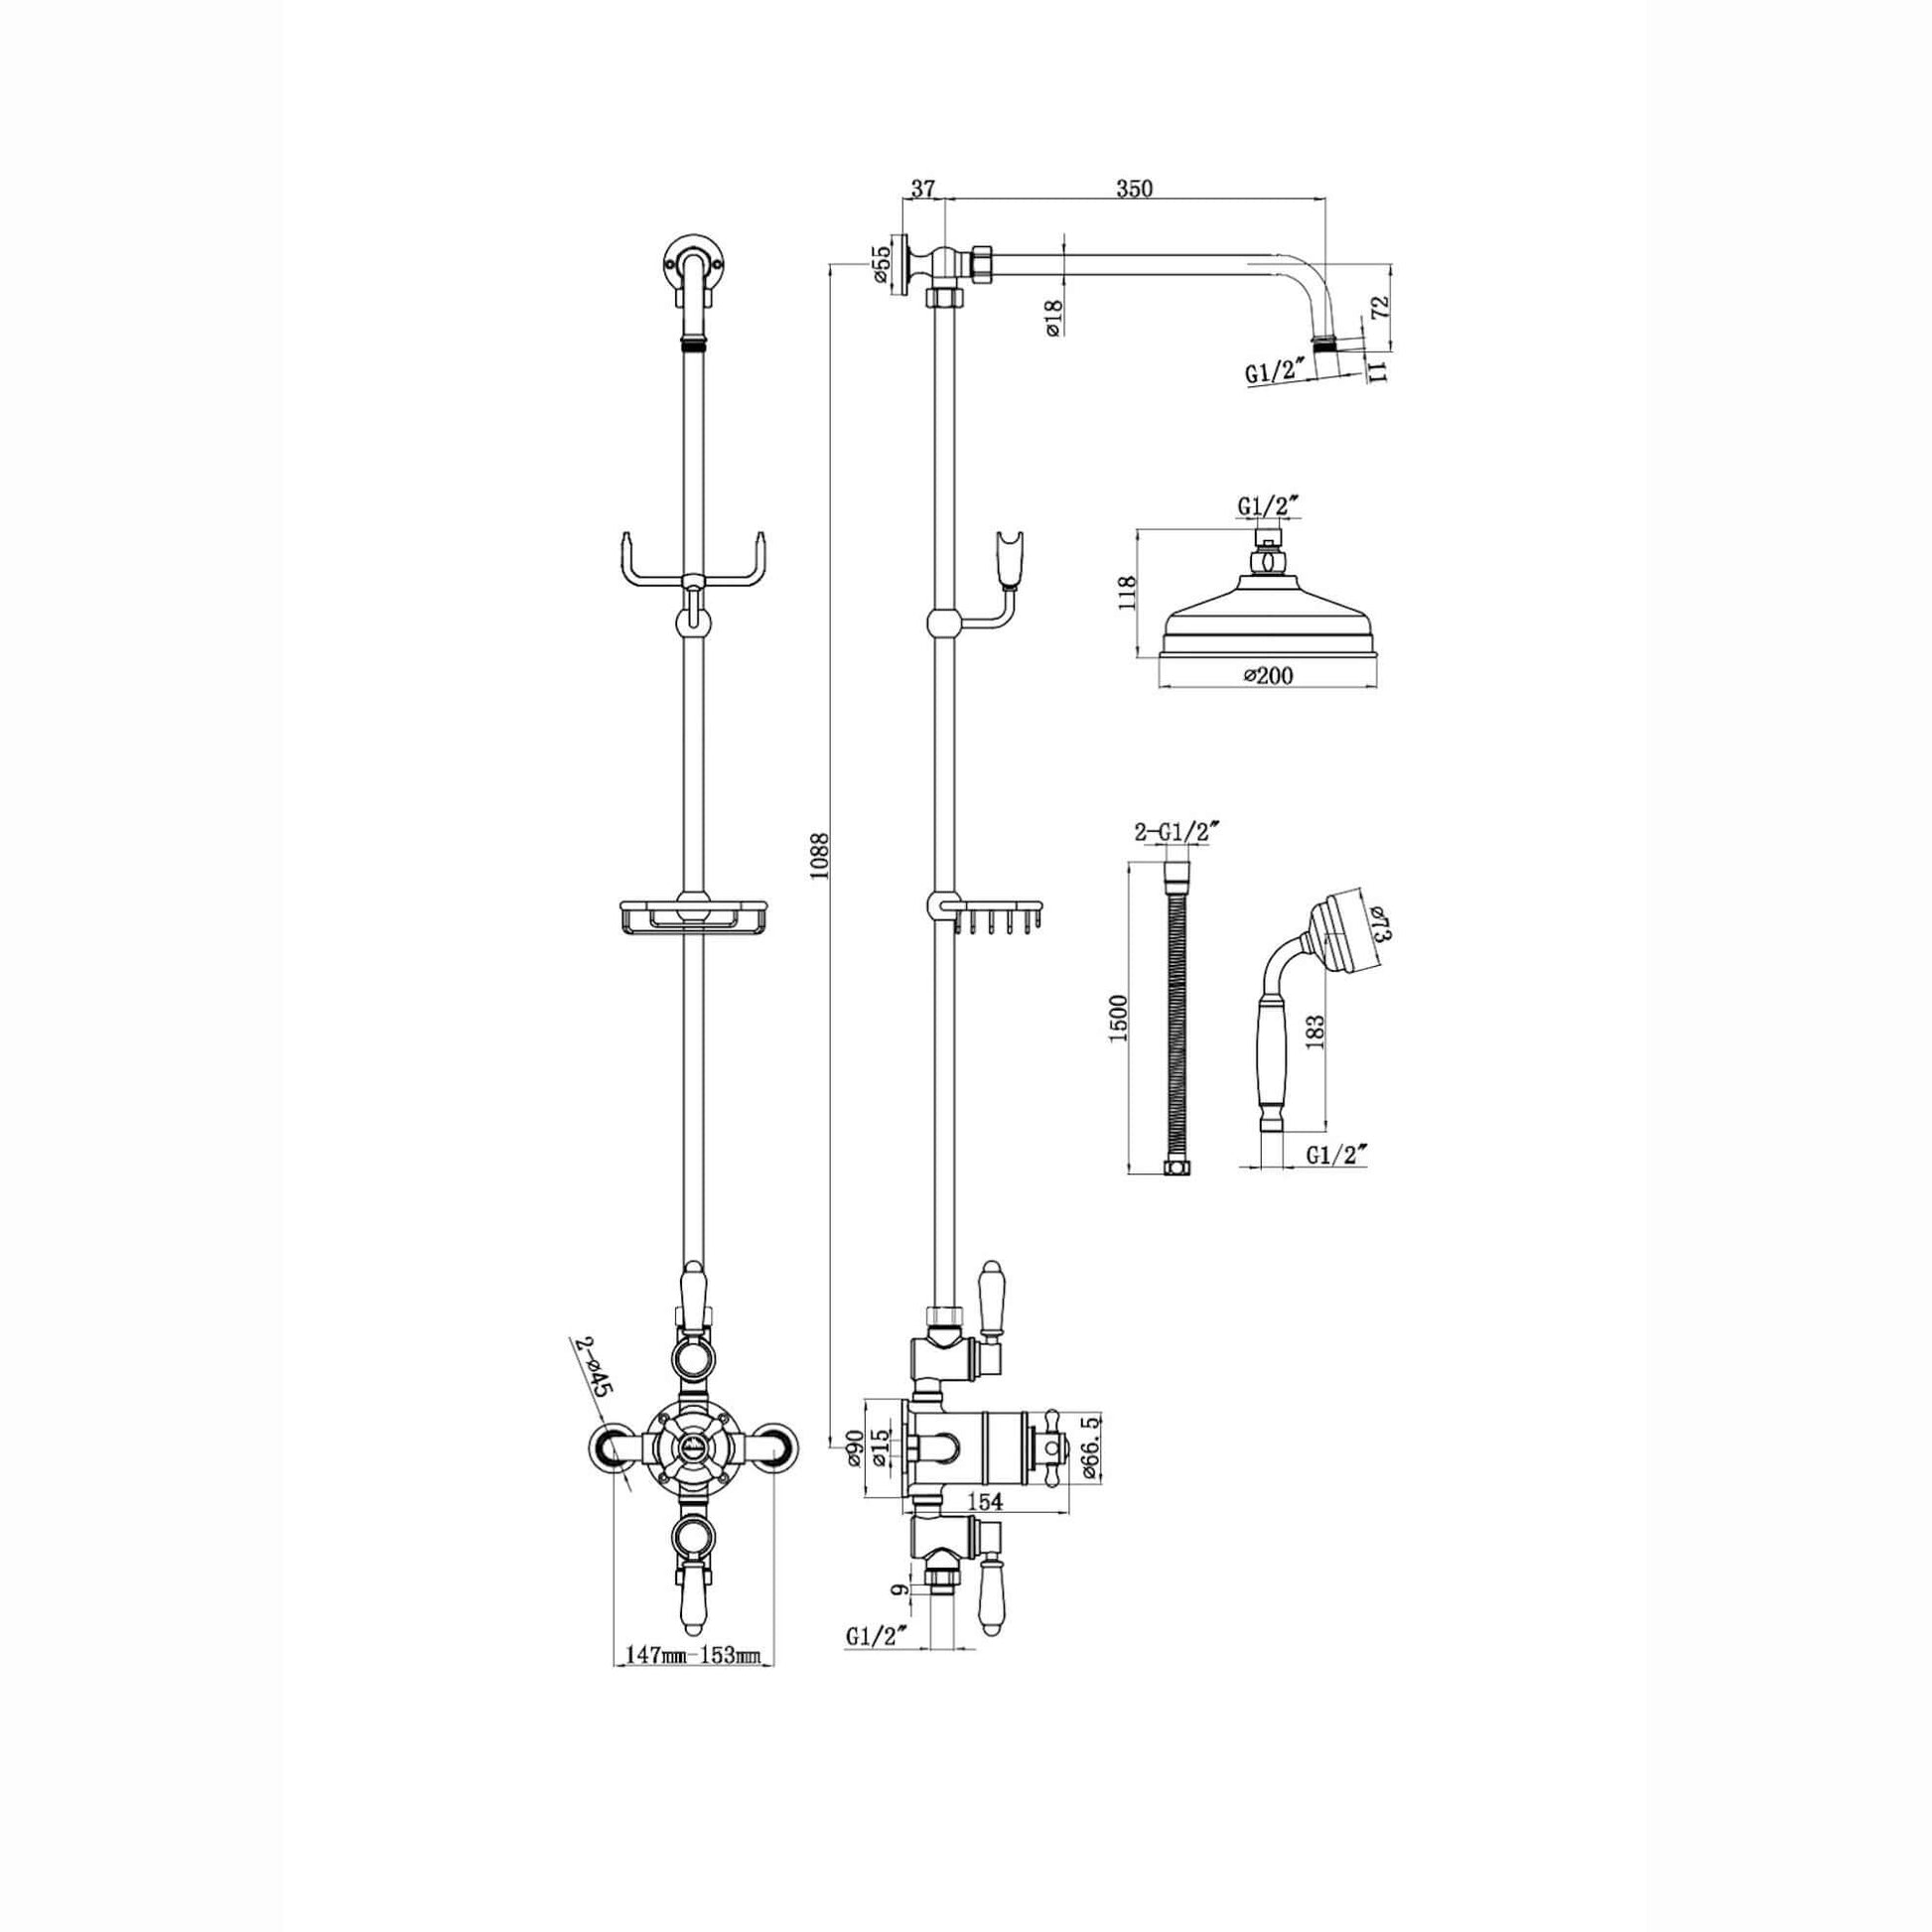 Downton Exposed Traditional Thermostatic Shower Set 2 Outlet, Incl. Triple Shower Valve, Rigid Riser Rail, 200mm Shower Head, Telephone Style Ceramic Handset & Caddy - English Gold And White - Showers